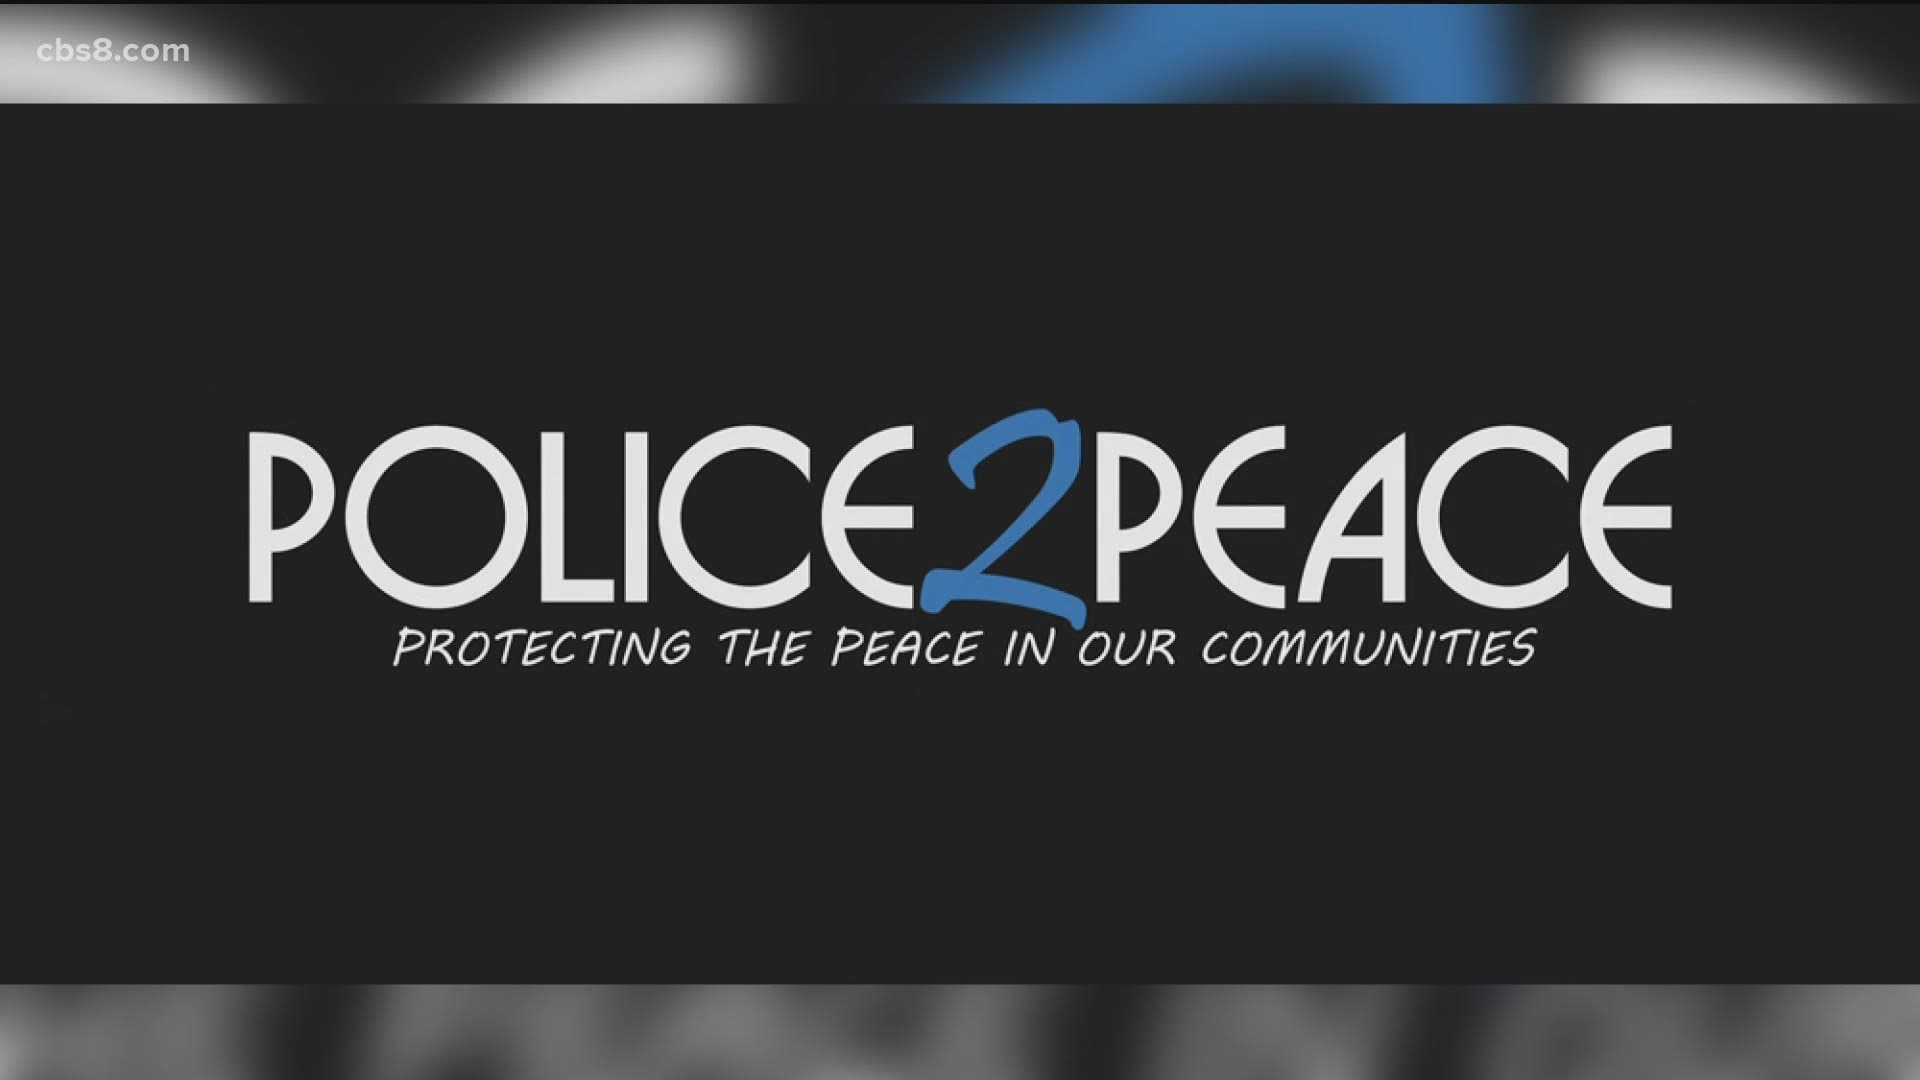 Executive Director of Police2Peace, Lisa Broderick joined Morning Extra to talk about the movement and how it helps police and the community.